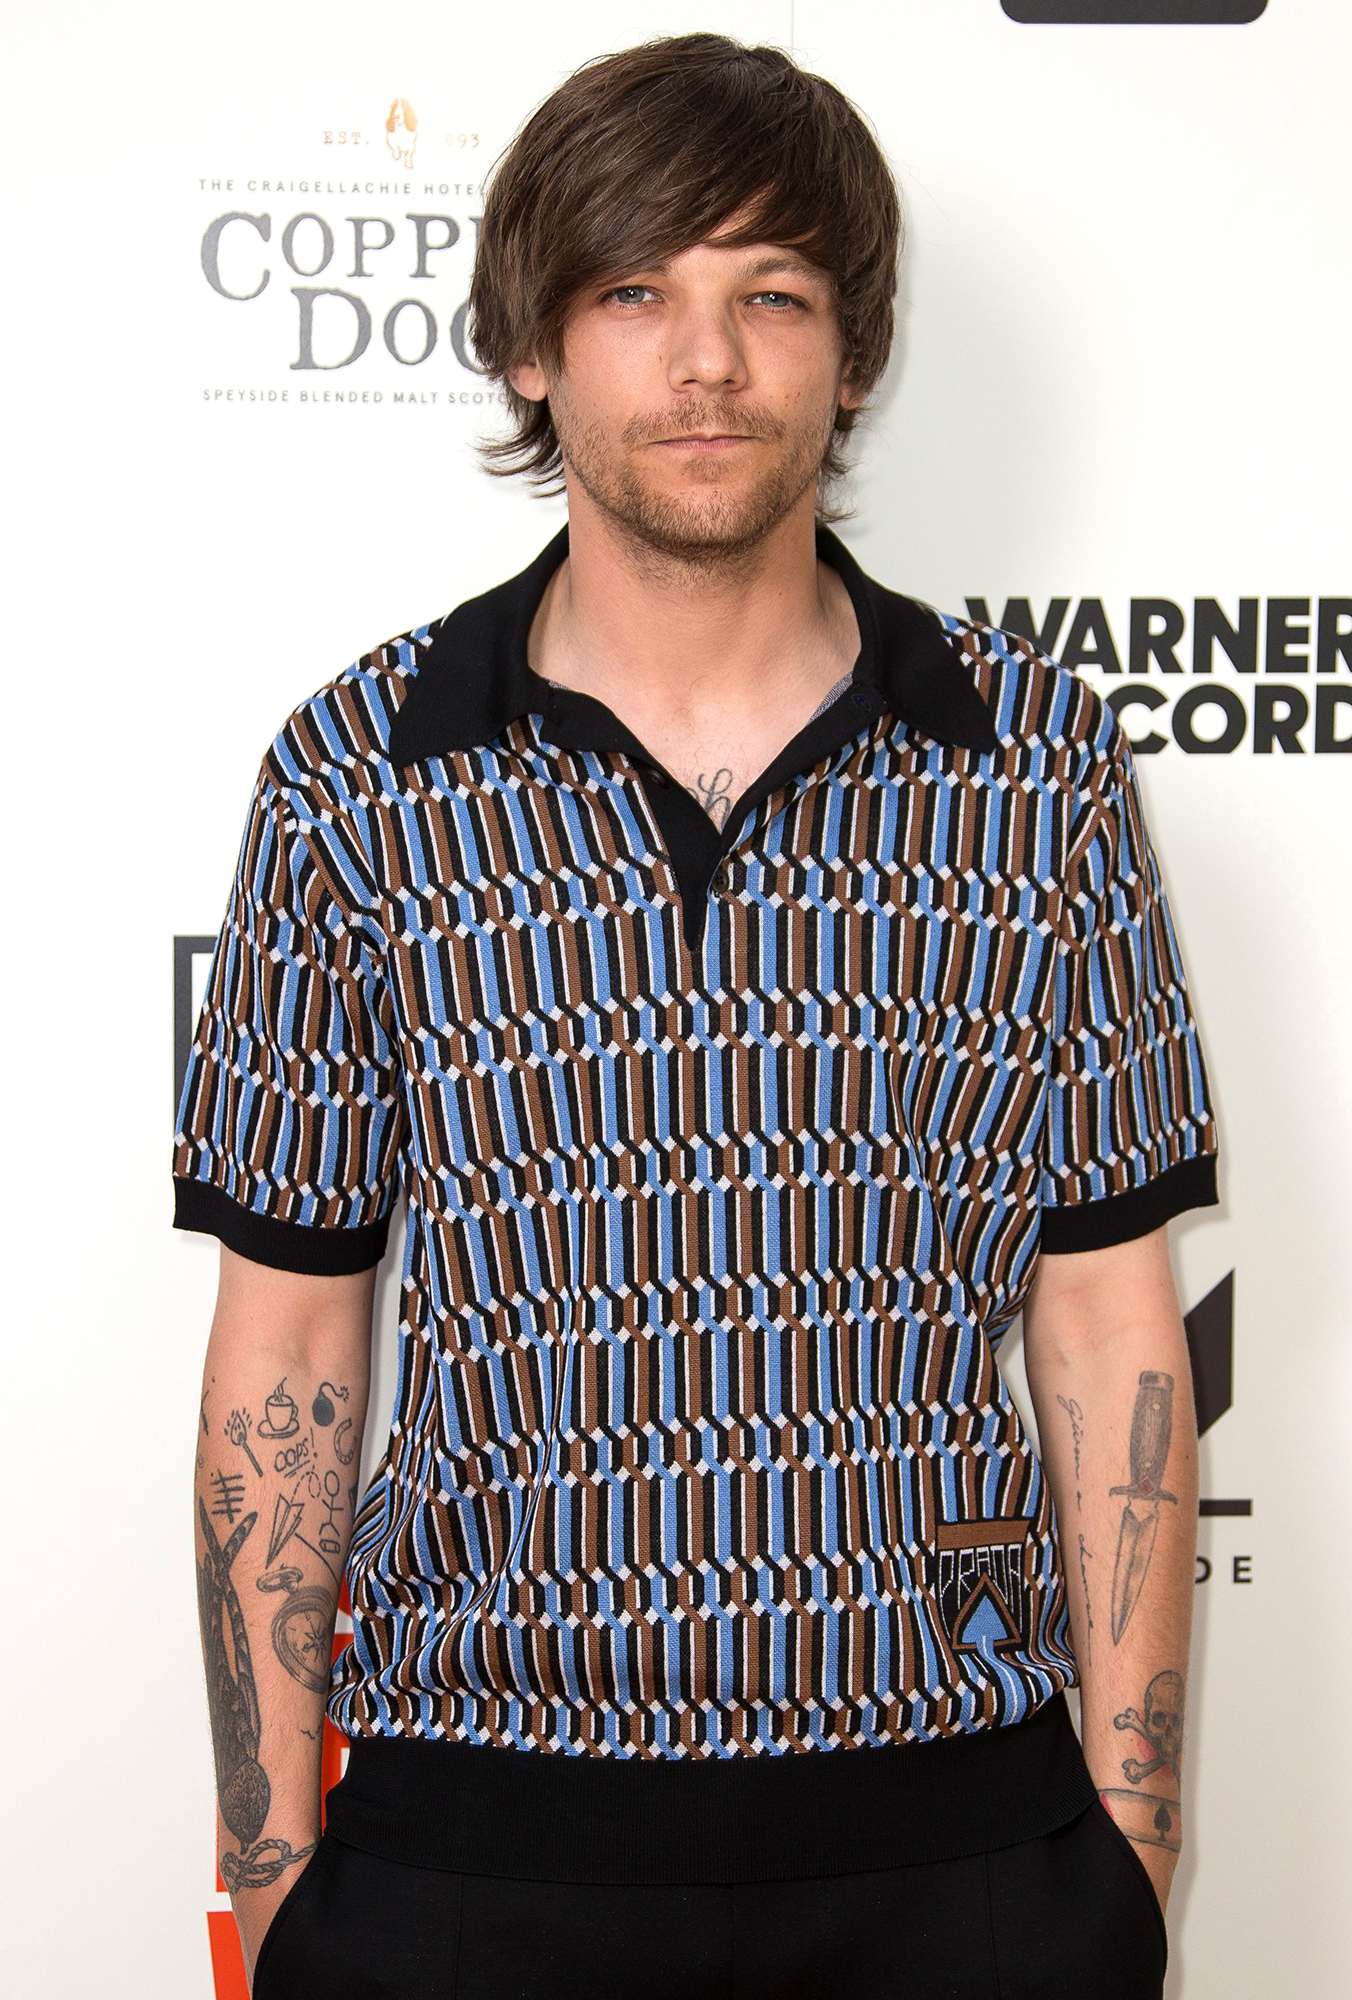 Louis Tomlinson Cancels Record Signings After Breaking Arm ‘Pretty Badly’